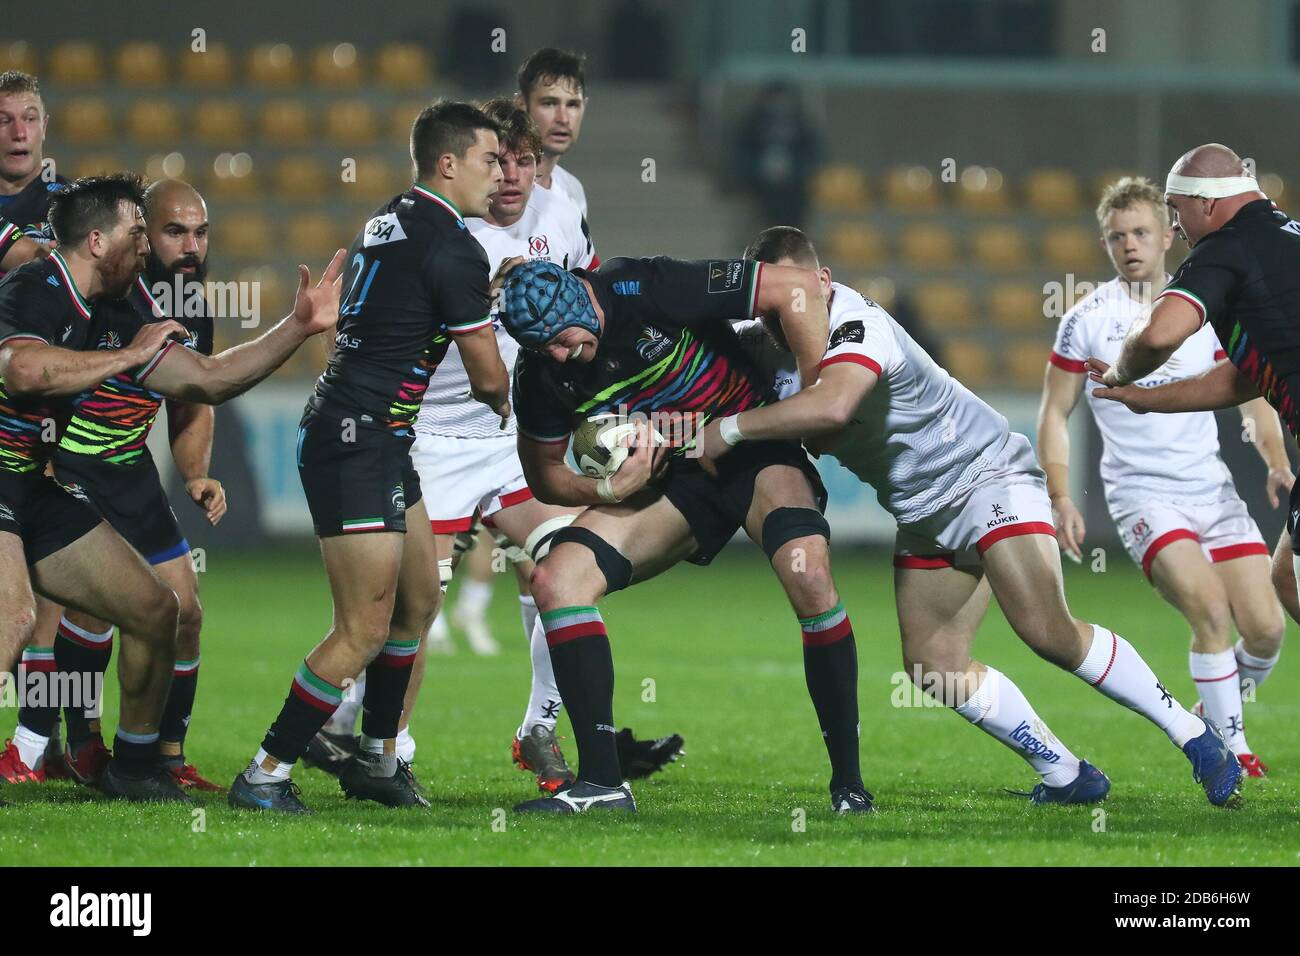 Sergio Lanfranchi stadium, Parma, Italy, 16 Nov 2020, Ian Nagle during Zebre Rugby vs Ulster Rugby, Rugby Guinness Pro 14 match - Photo Massimiliano Carnabuci / LM Stock Photo